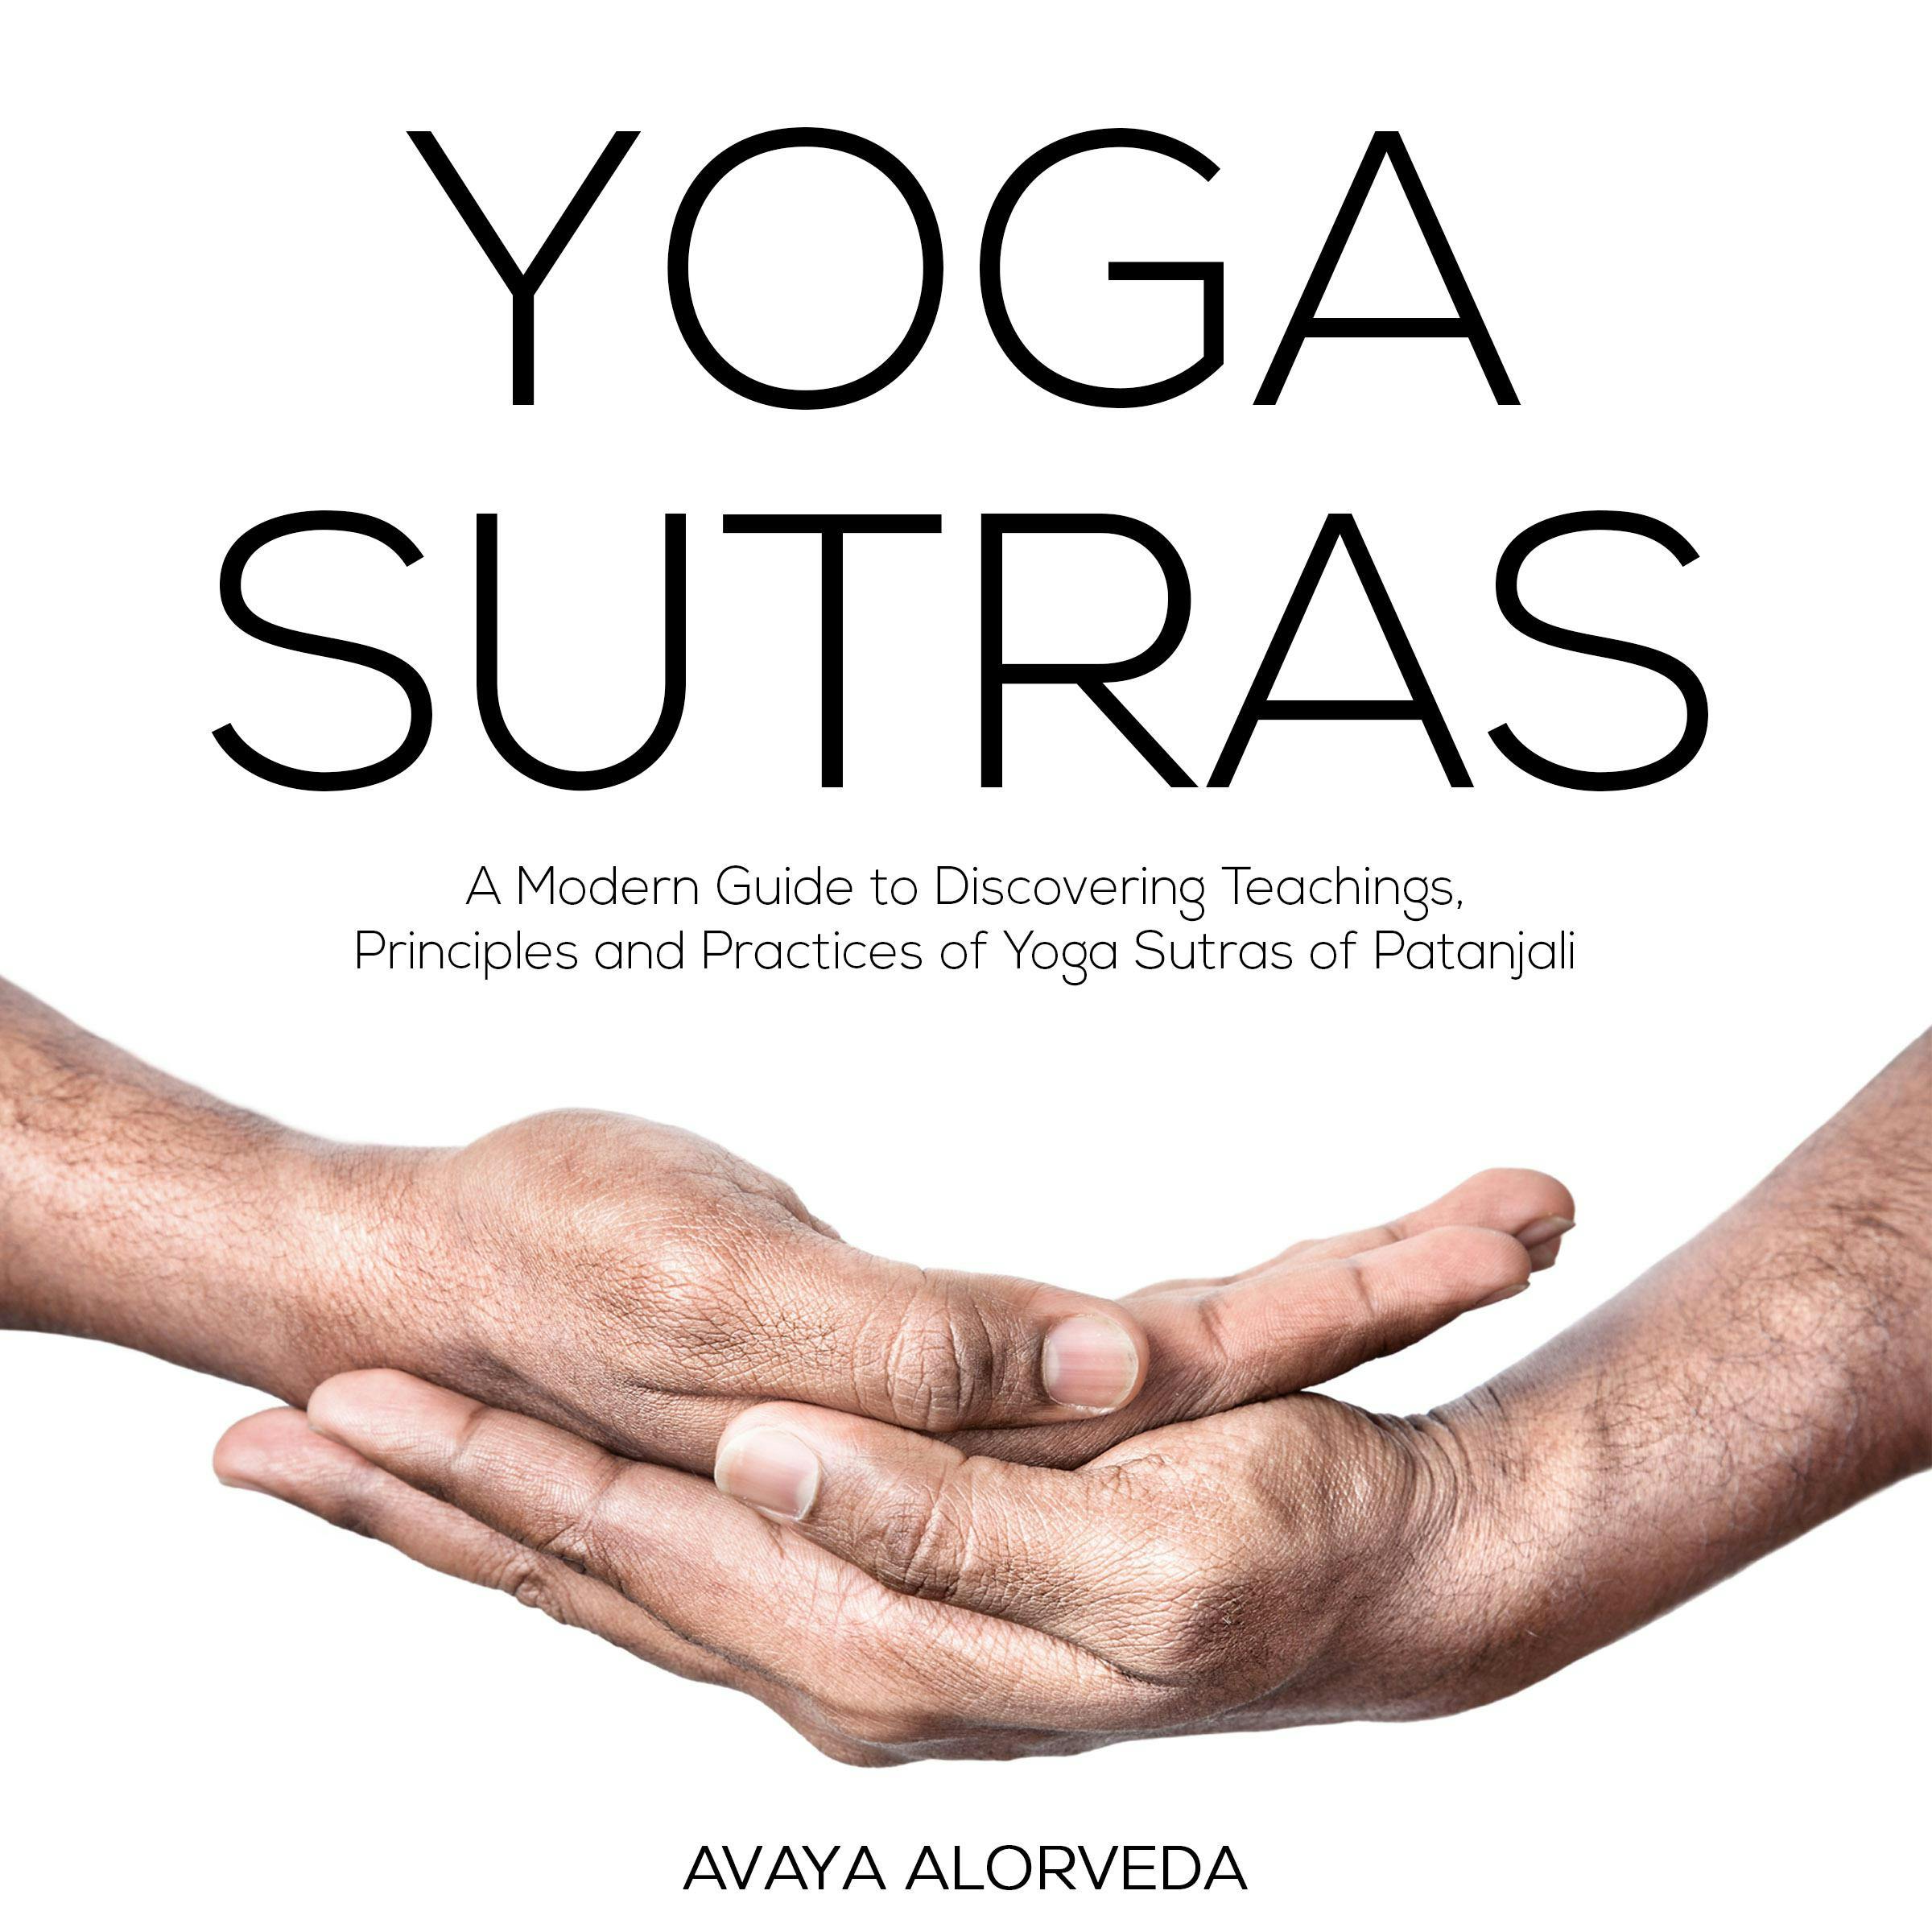 Yoga Sutras: A Modern Guide to Discovering Teachings, Principles and Practices of Yoga Sutras of Patanjali - Avaya Alorveda